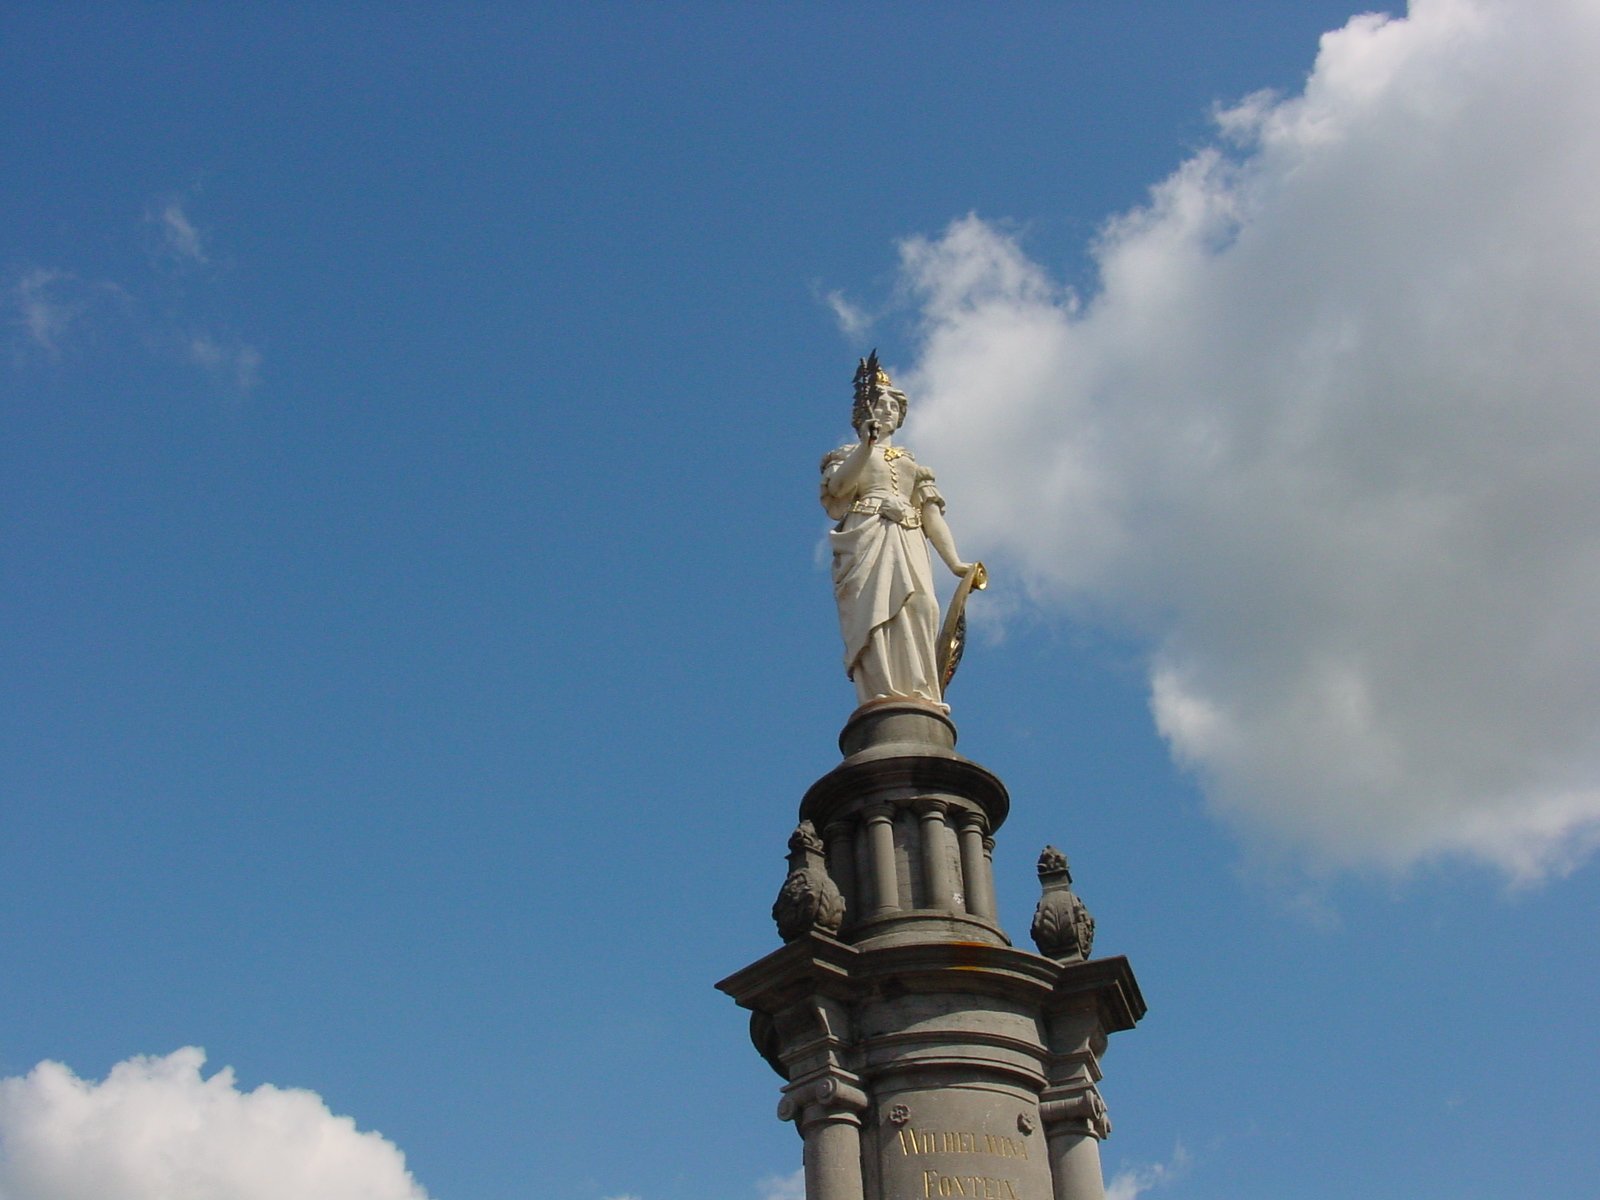 a large statue on top of a tower